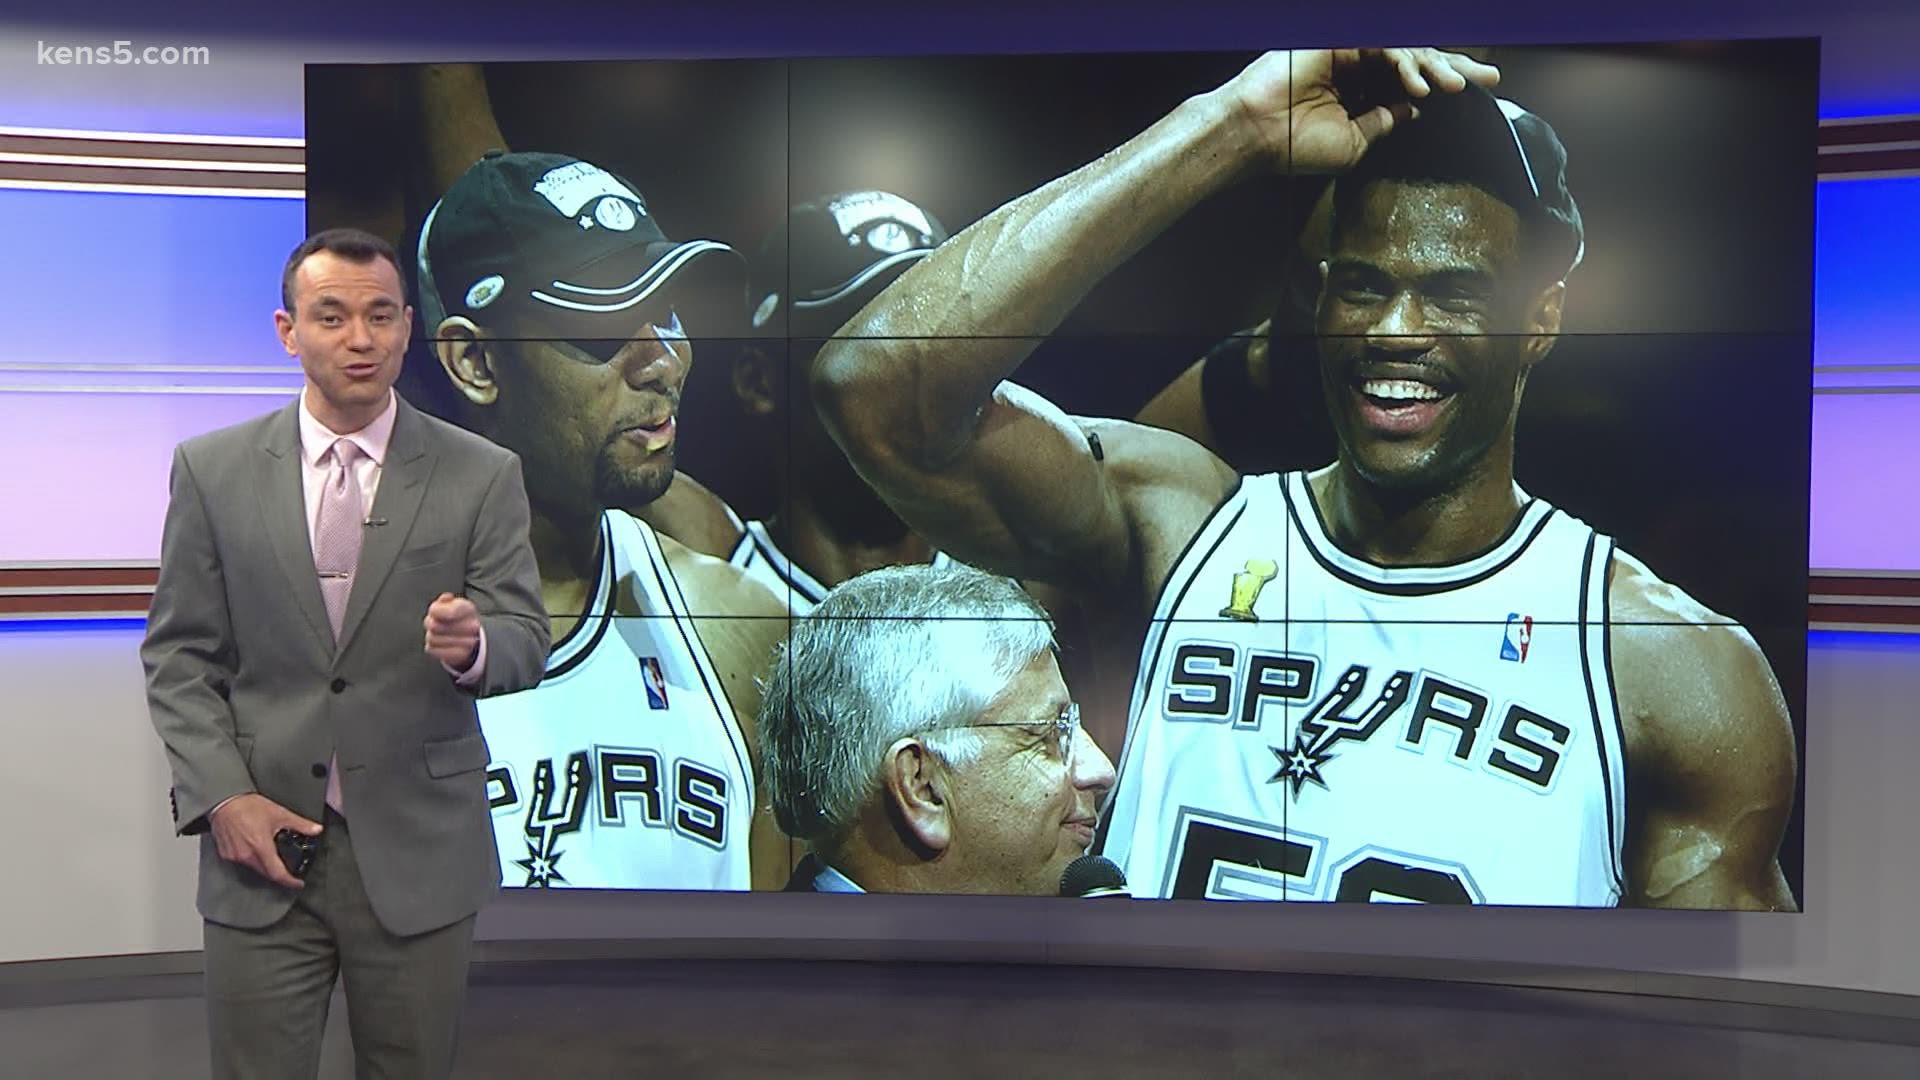 Our Evan Closky makes the case that much like the 1999 title run for the Spurs, the circumstances of this NBA season shouldn't take away from whoever wins.